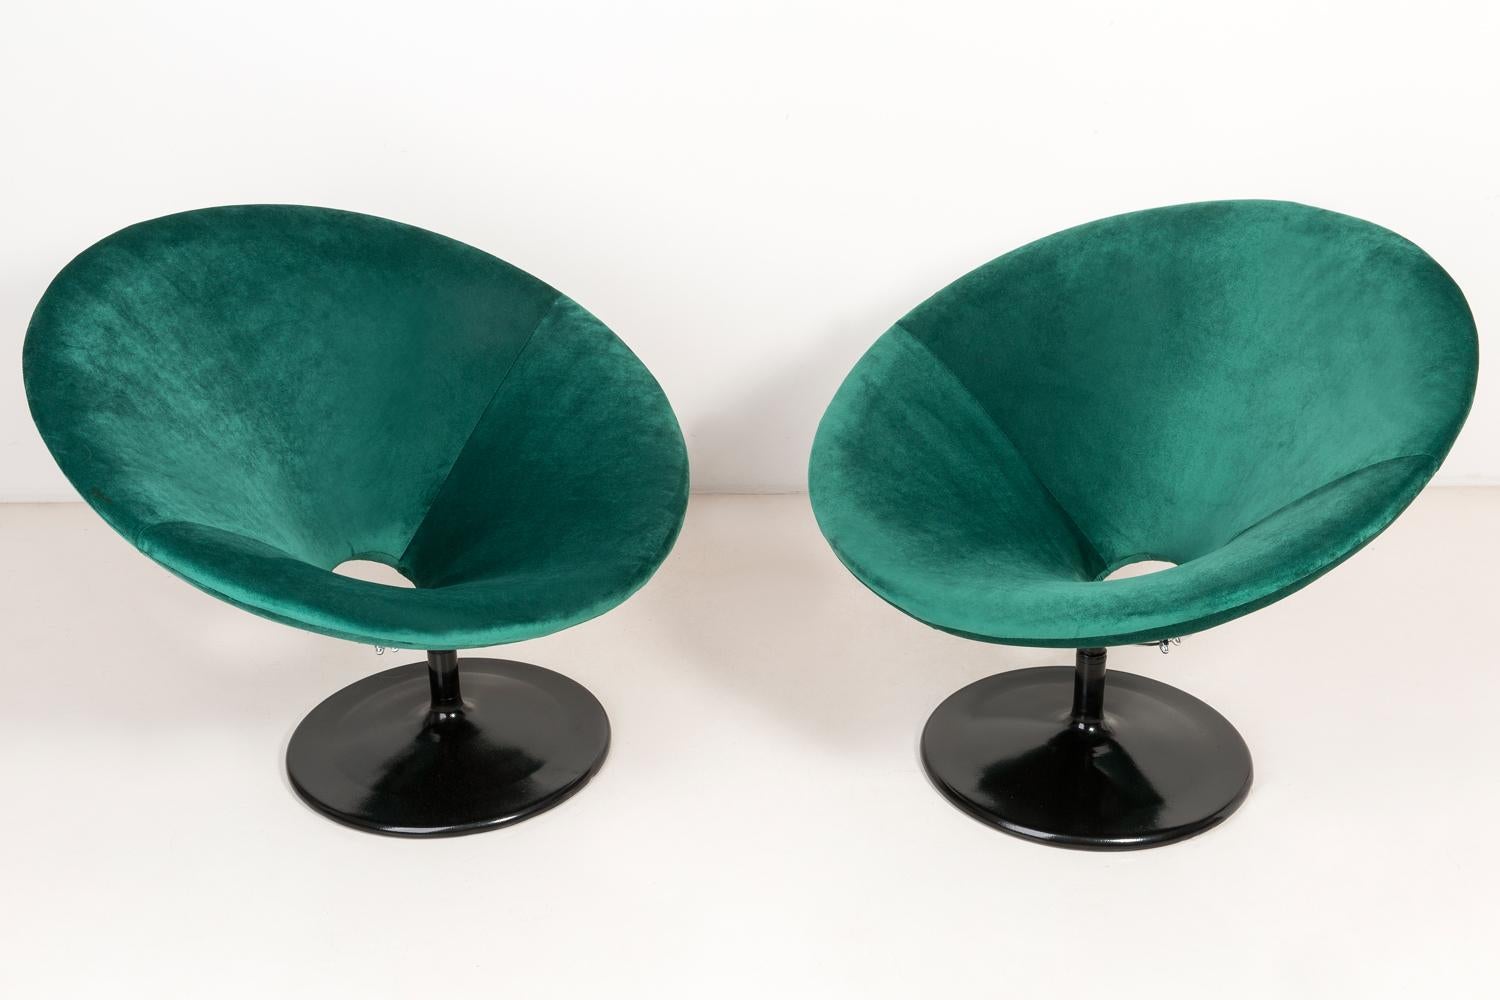 Polish Set of Two 20th Century Vintage Dark Green Swivel Armchairs, 1960s For Sale